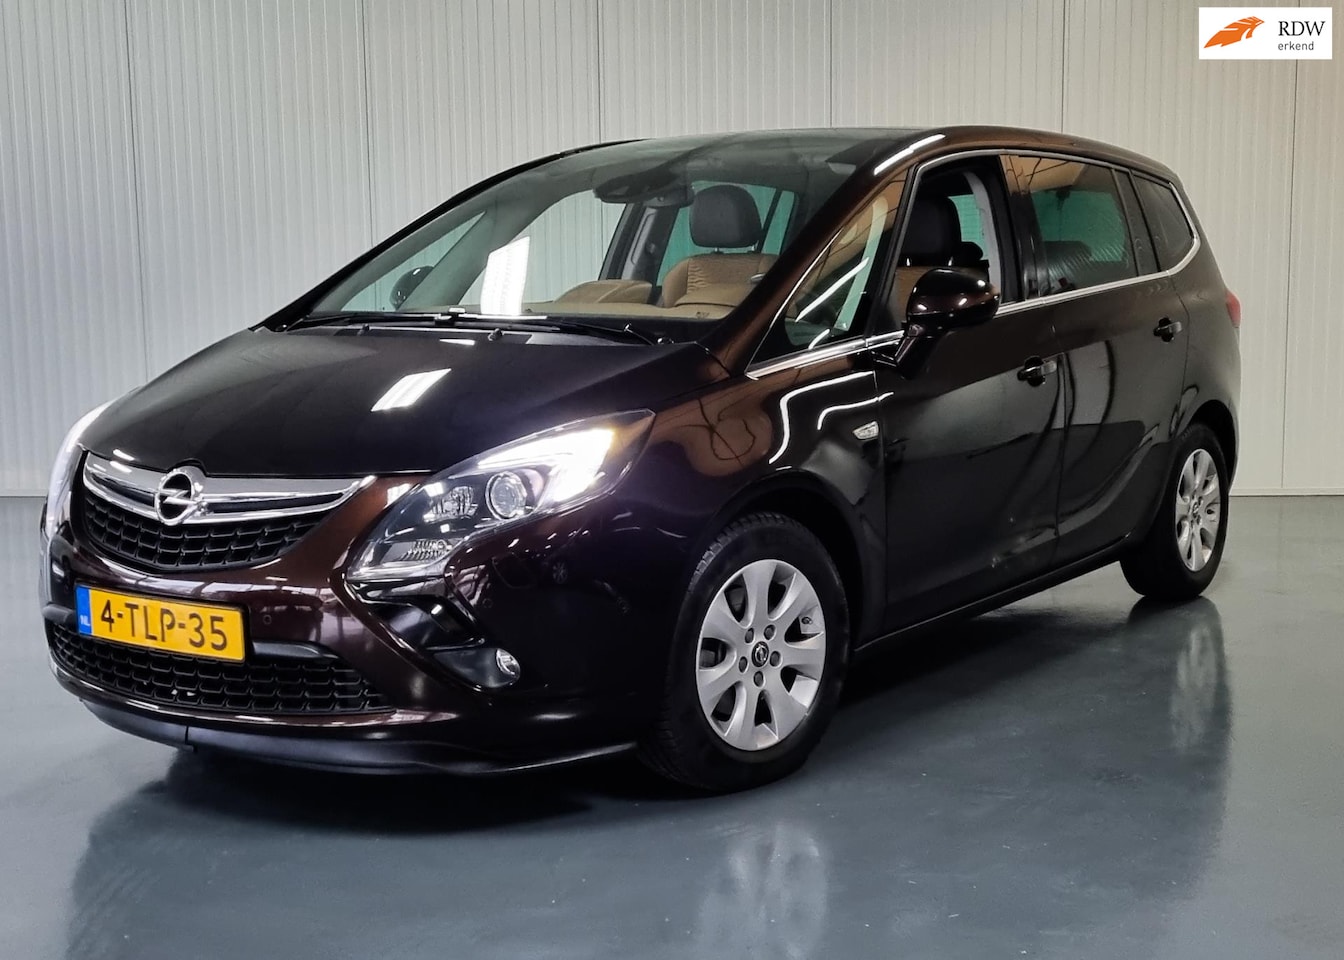 bezig Kruiden vorst opel zafira automaat used – Search for your used car on the parking